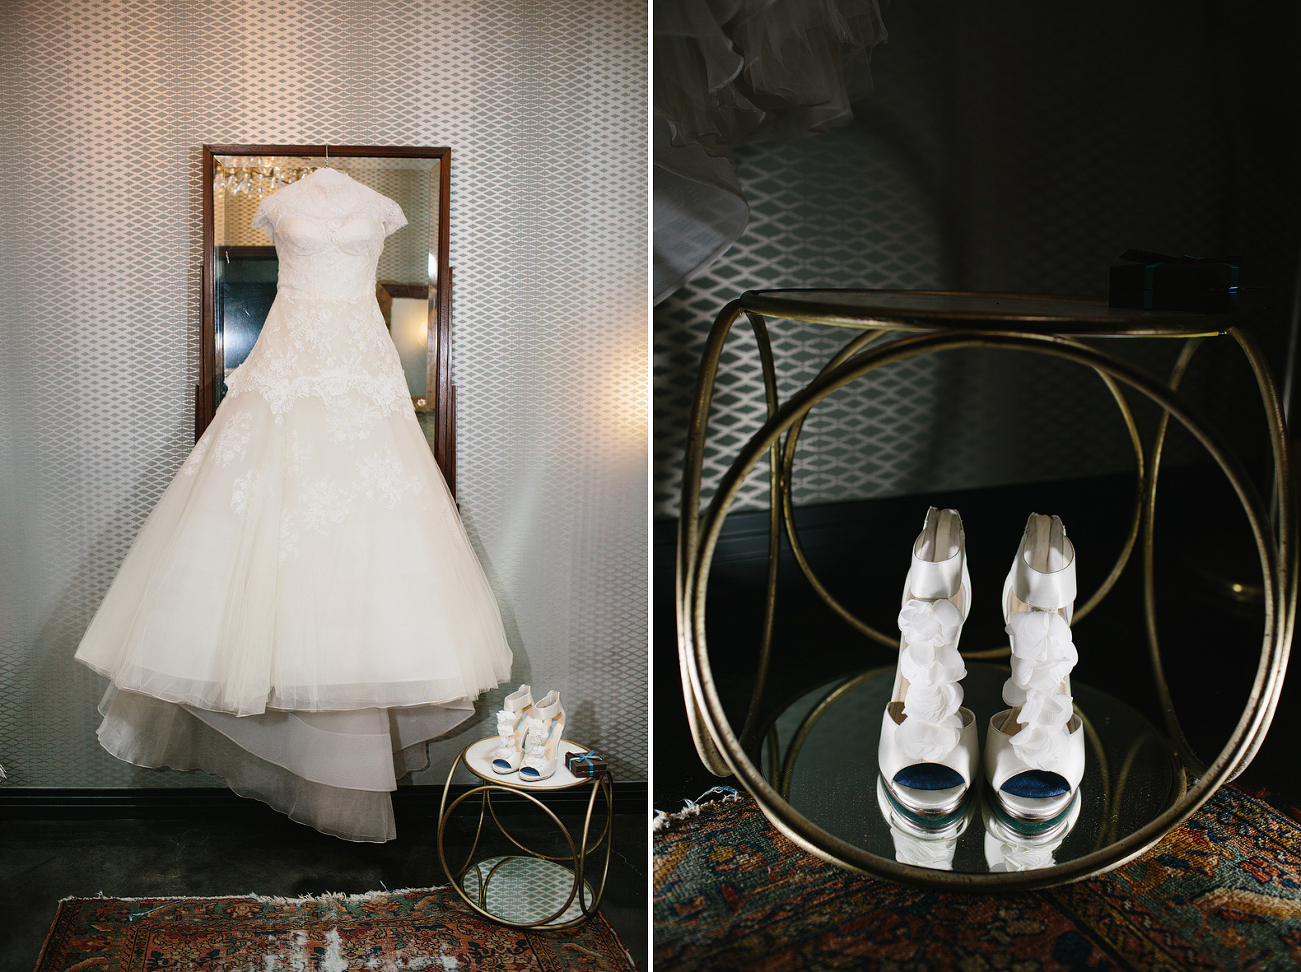 These are detail photos of the dress and shoes.